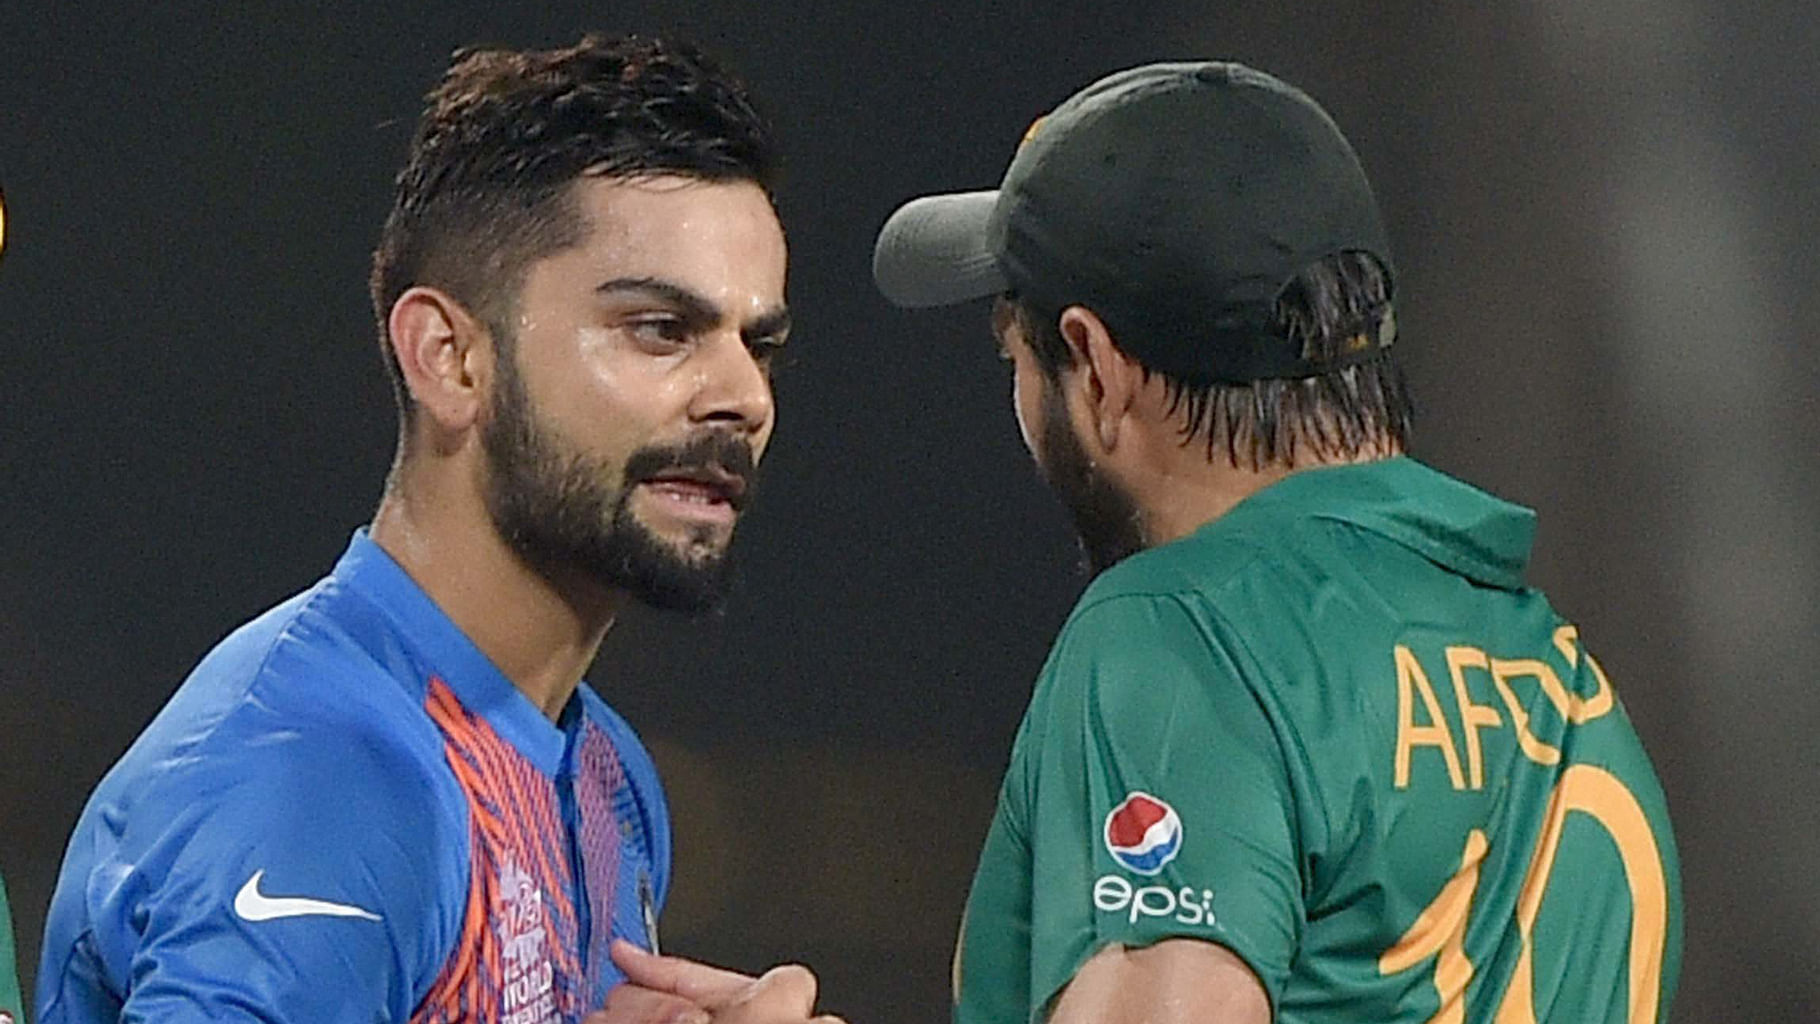 Virat Kohli being greeted by Pak captain Shahid Afridi after winning the match against Pakistan during the ICC T20 World cup at Eden Garden in Kolkata on Saturday. (Photo: PTI)